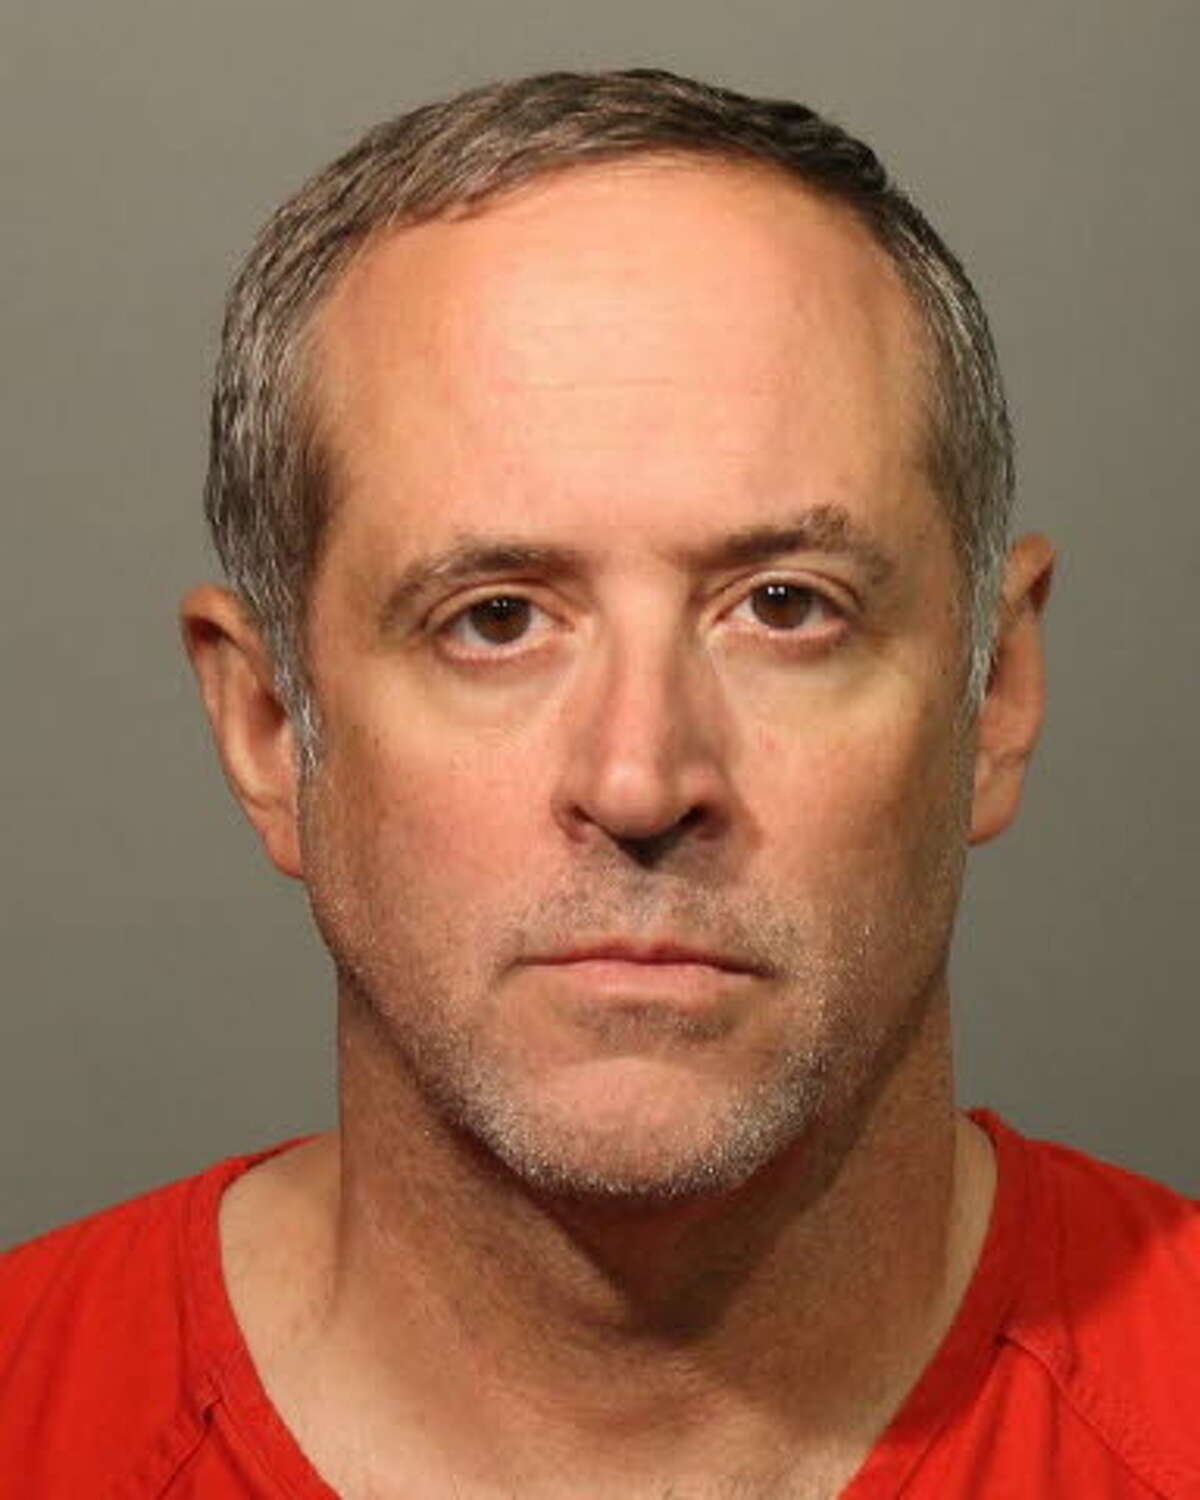 Michael Doherty, a 51-year-old Cedar Park resident, could spend life in federal prison if convicted of trying to solicit sex from a 10-year-old Florida girl, according to the U.S. Attorney's Office. Doherty allegedly traveled to Florida after an undercover FBI agent replied to Doherty's online posting about "incestuous sexual encounters."